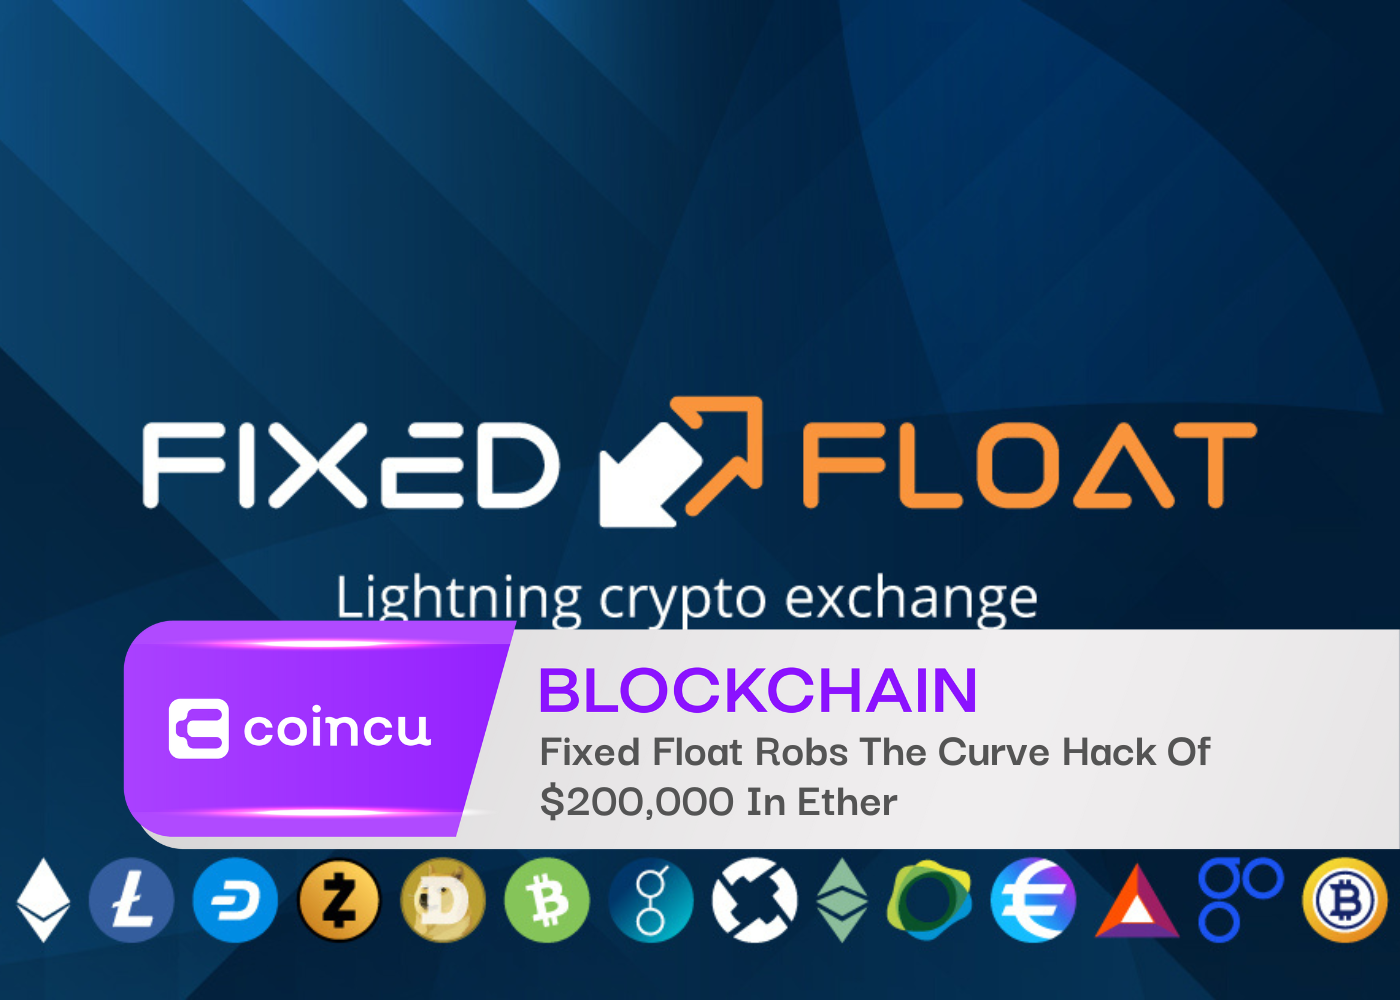 Fixed Float Robs The Curve Hack Of